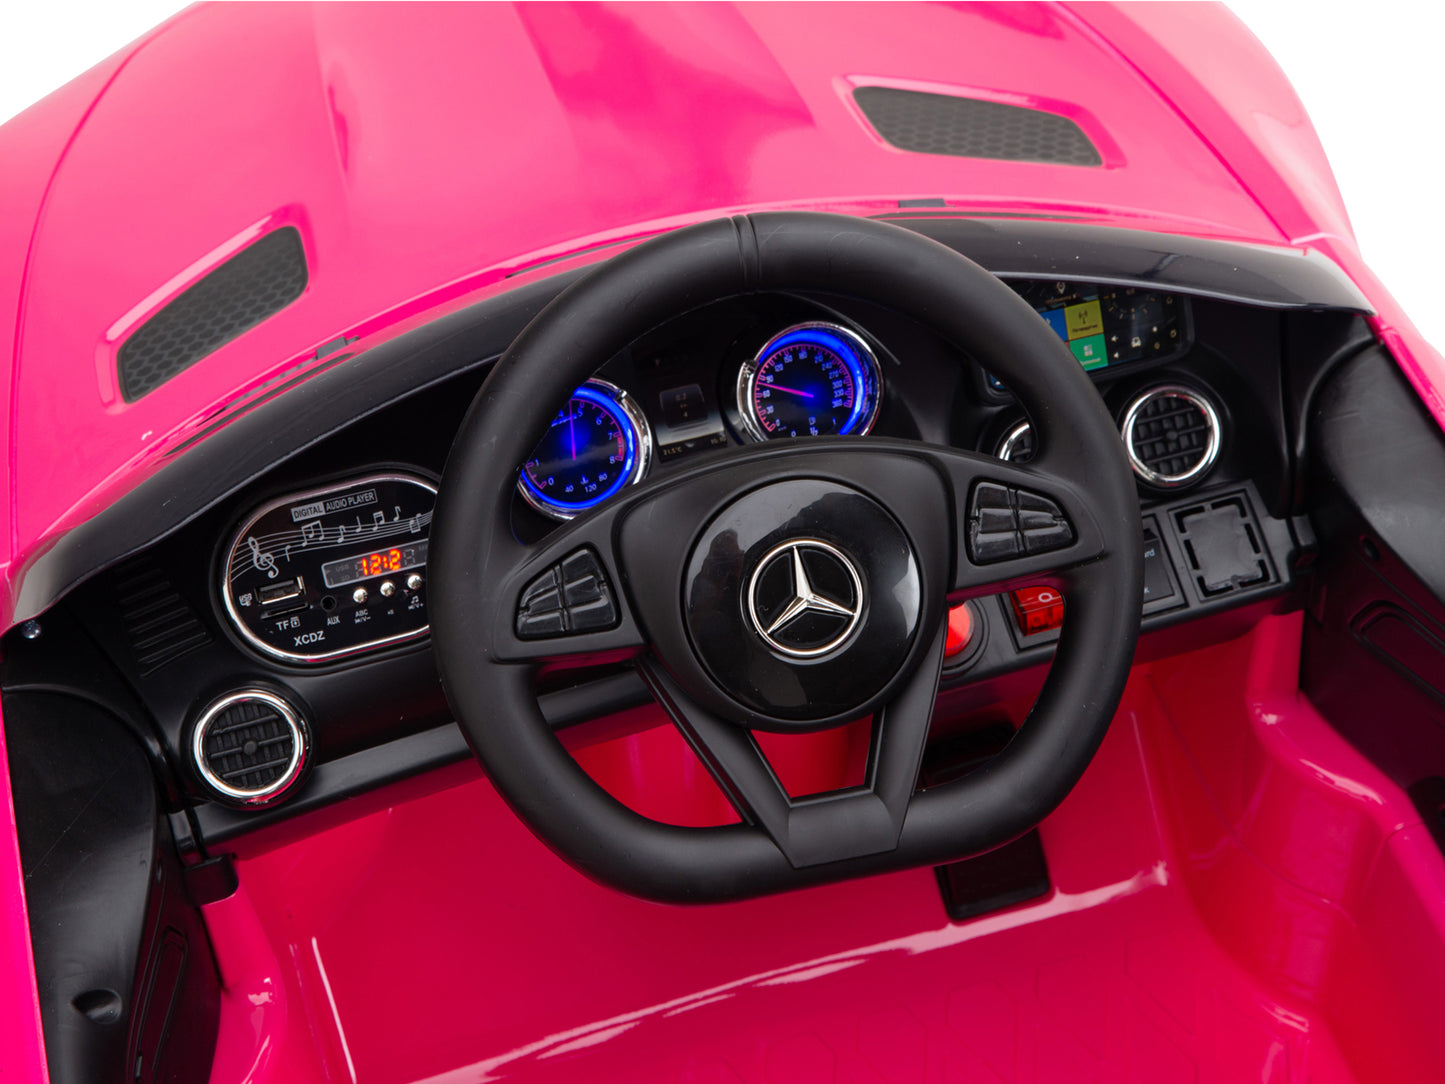 Mercedes-AMG GT Coupe 12V Battery Operated Ride On Car with Remote Control - Pink